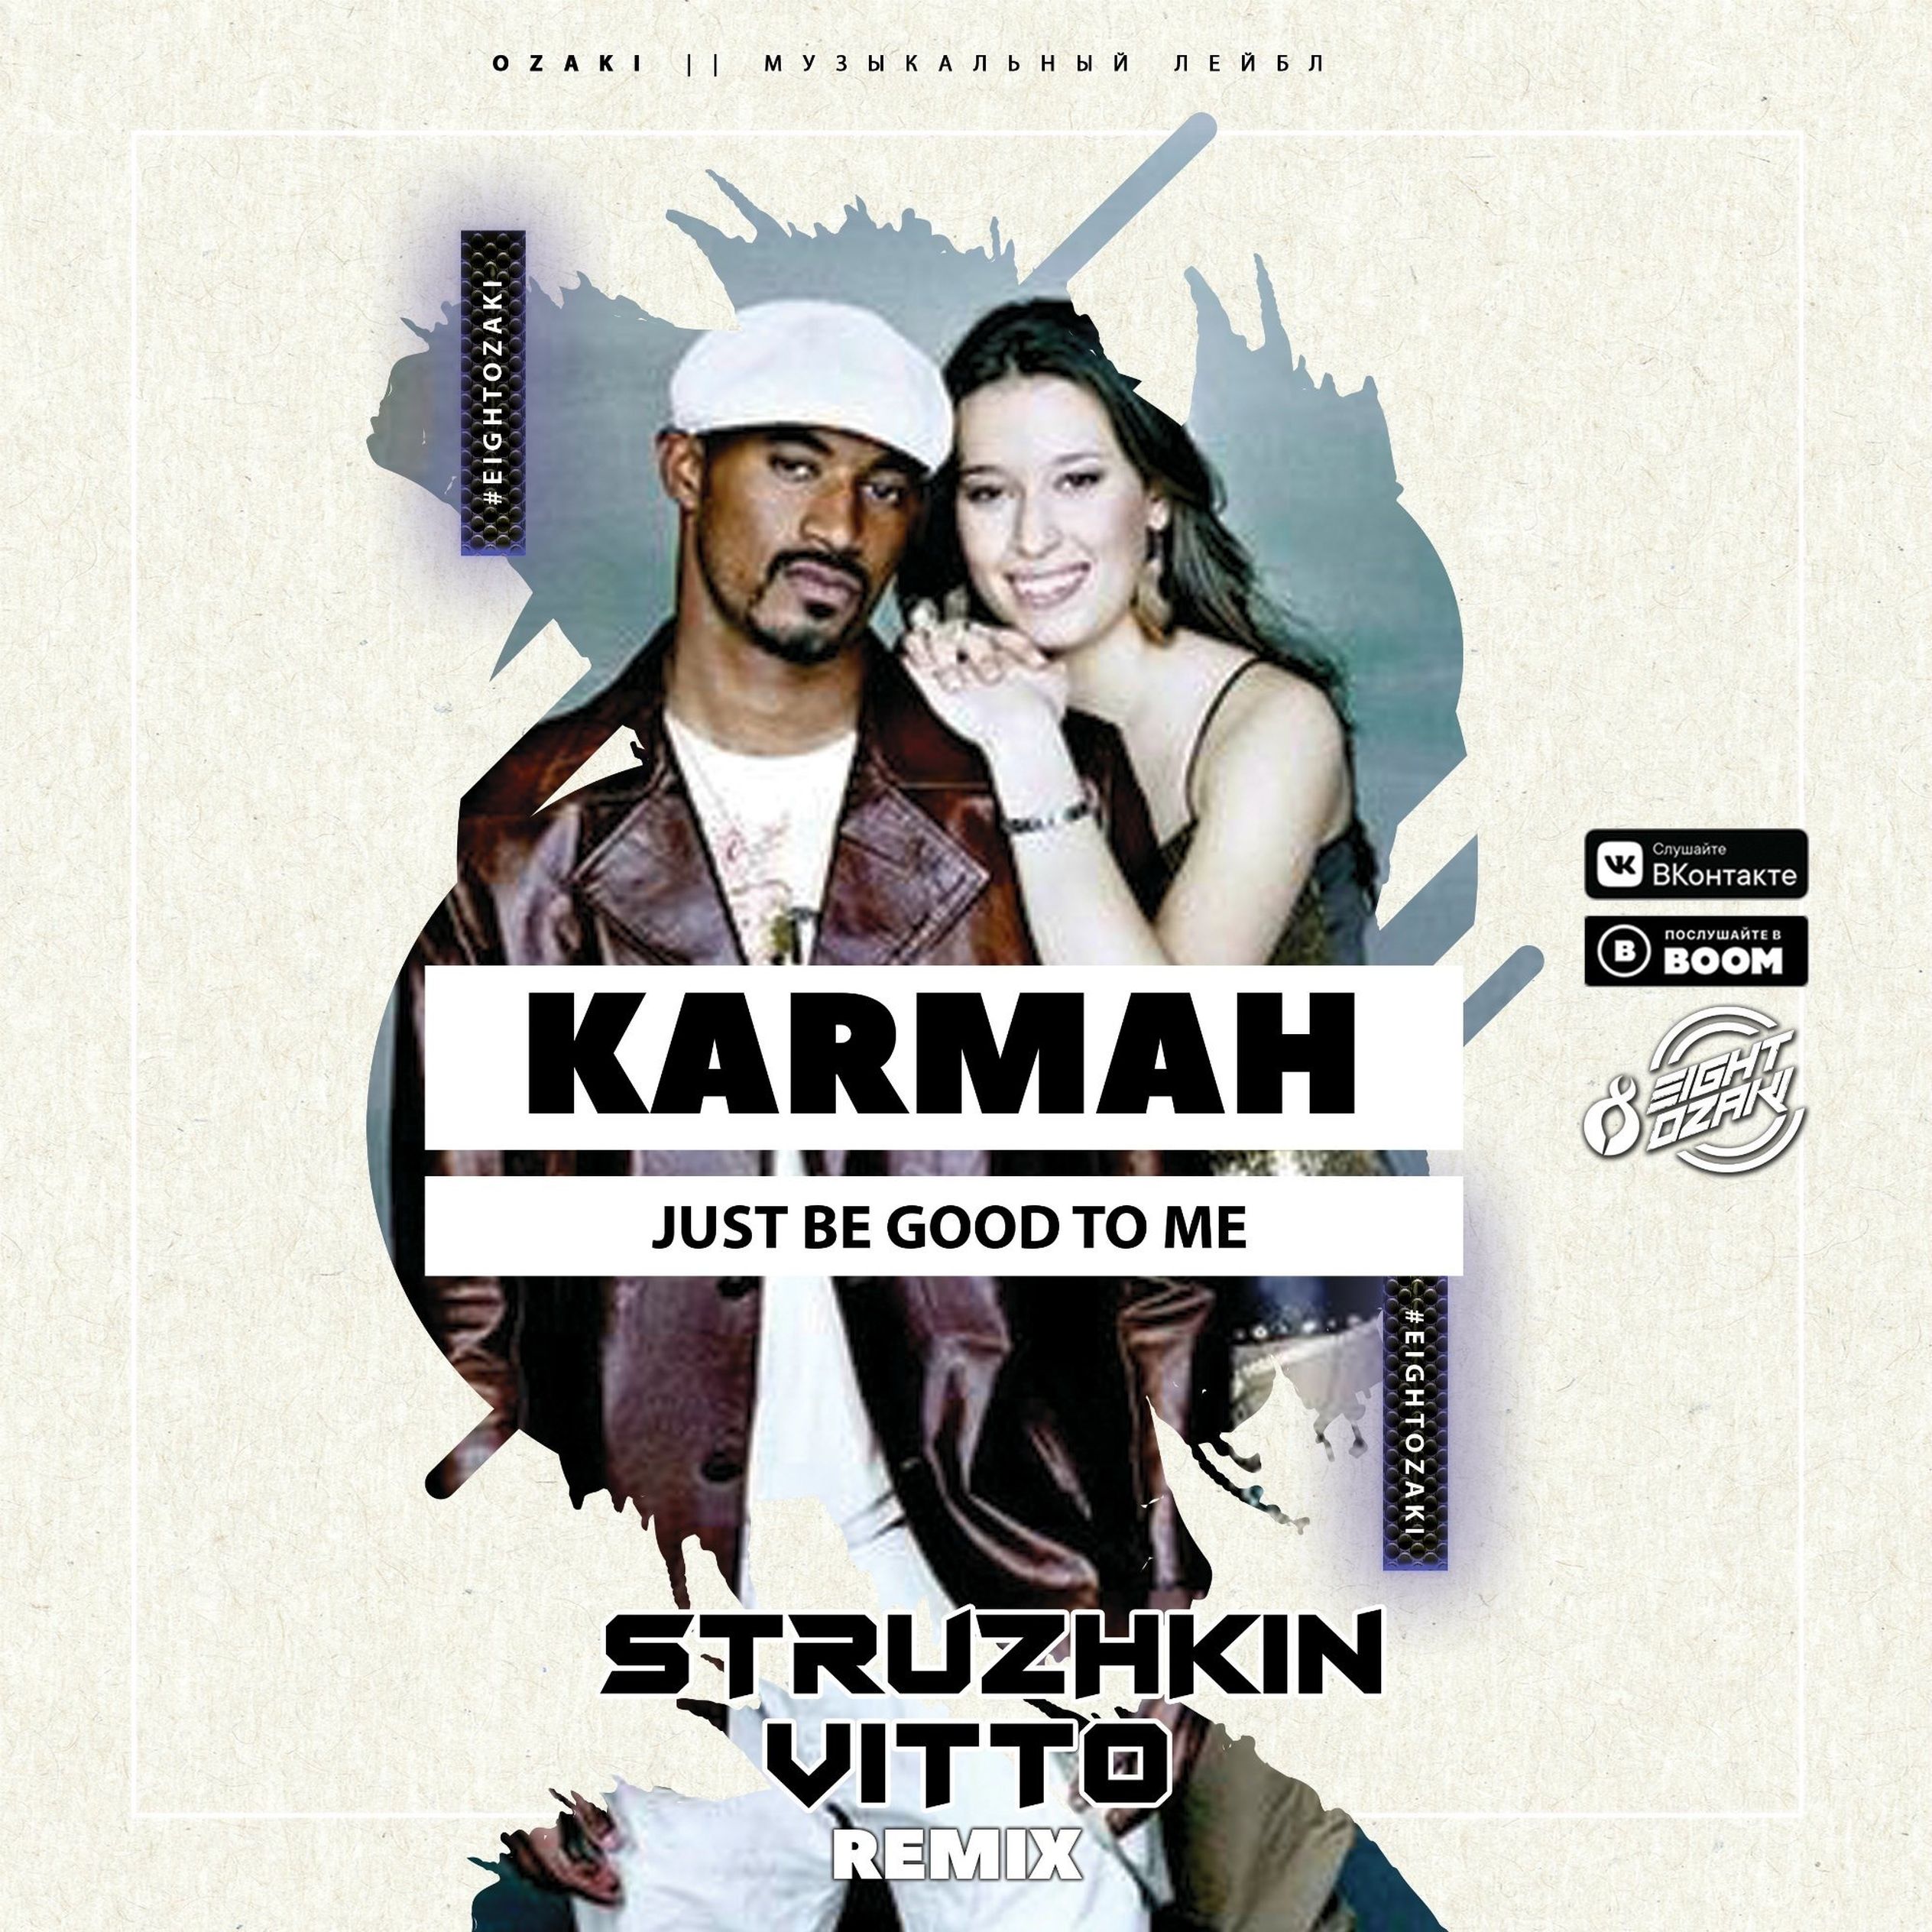 Be good to me текст. Karmah just be good to me. Karmah just be good to me обложка. Karmah - just be good to me (Radio Cut) (Radio Cut). Karmah - be good to me album Cover.